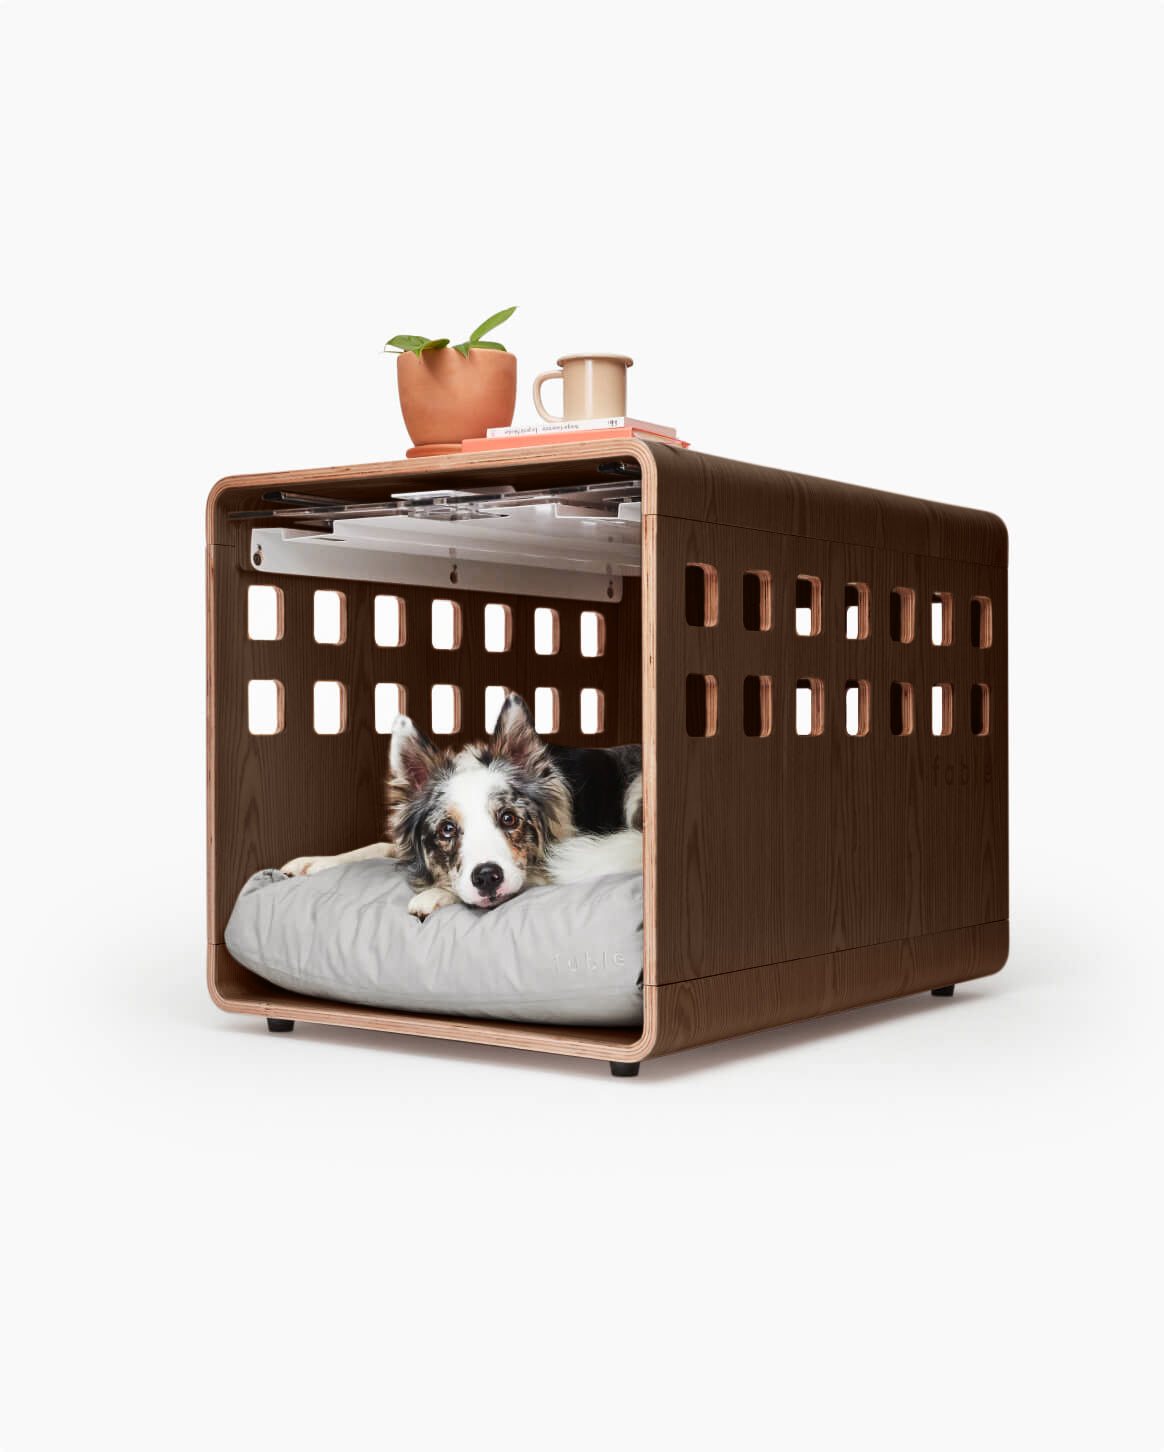 Fable Crate Makes the Best Looking Dog Crate on the Market